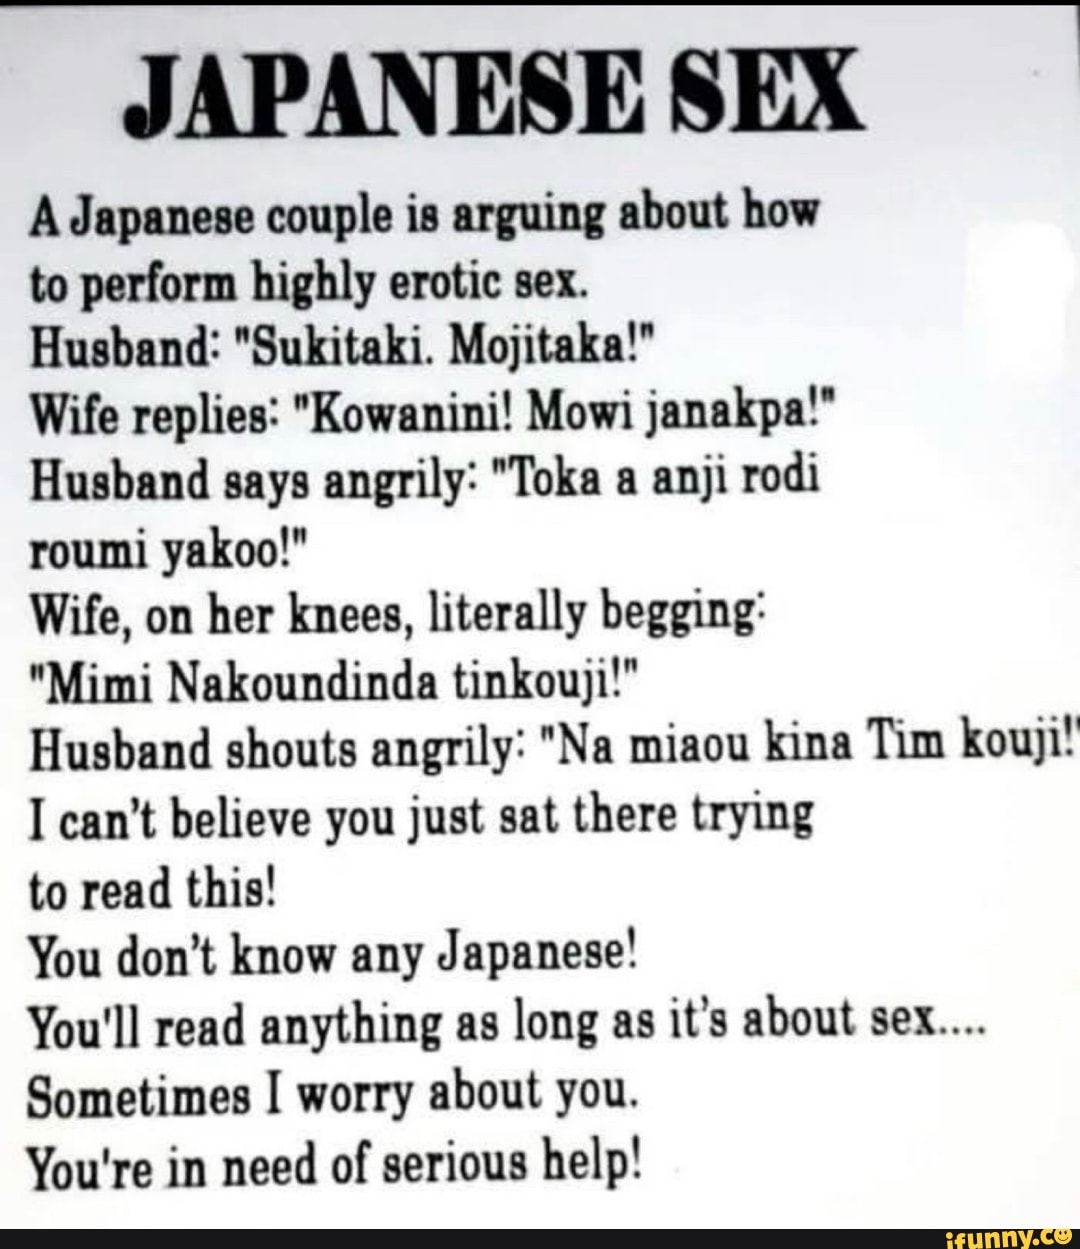 JAPANESE SEX A Japanese couple is arguing about how to perform highly erotic